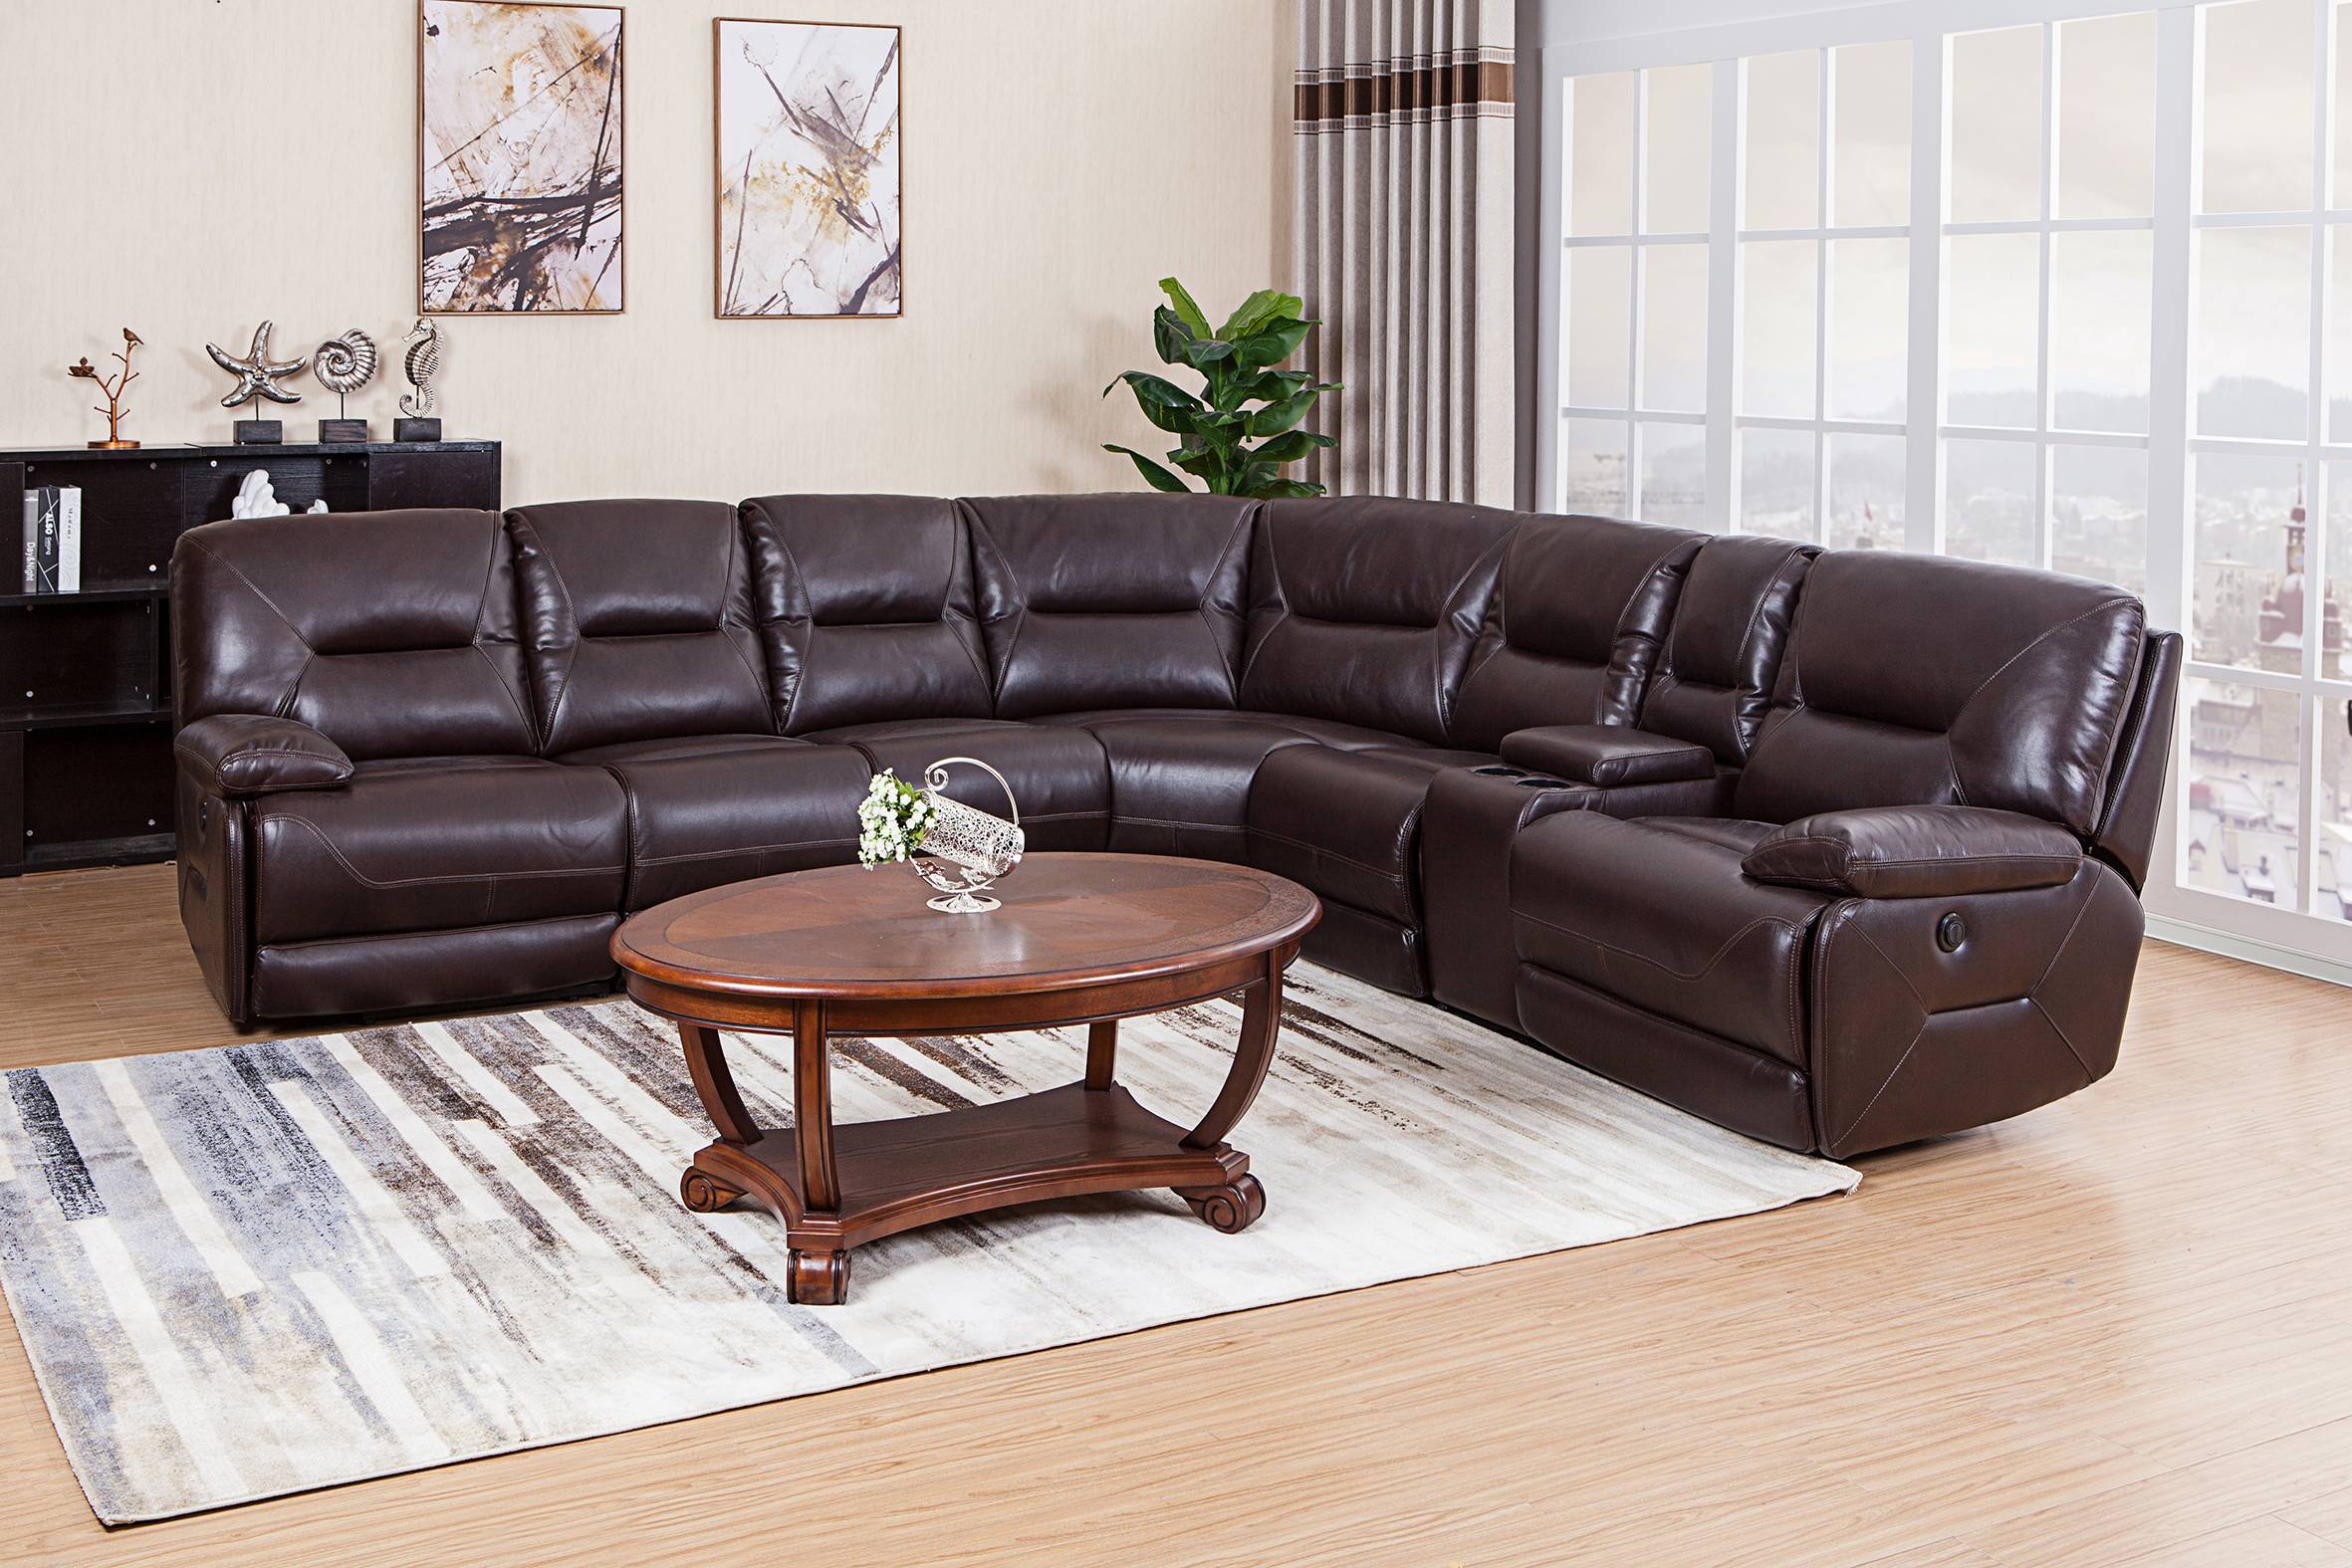 Royal living room furniture leather recliner sectional sofa with cup holder